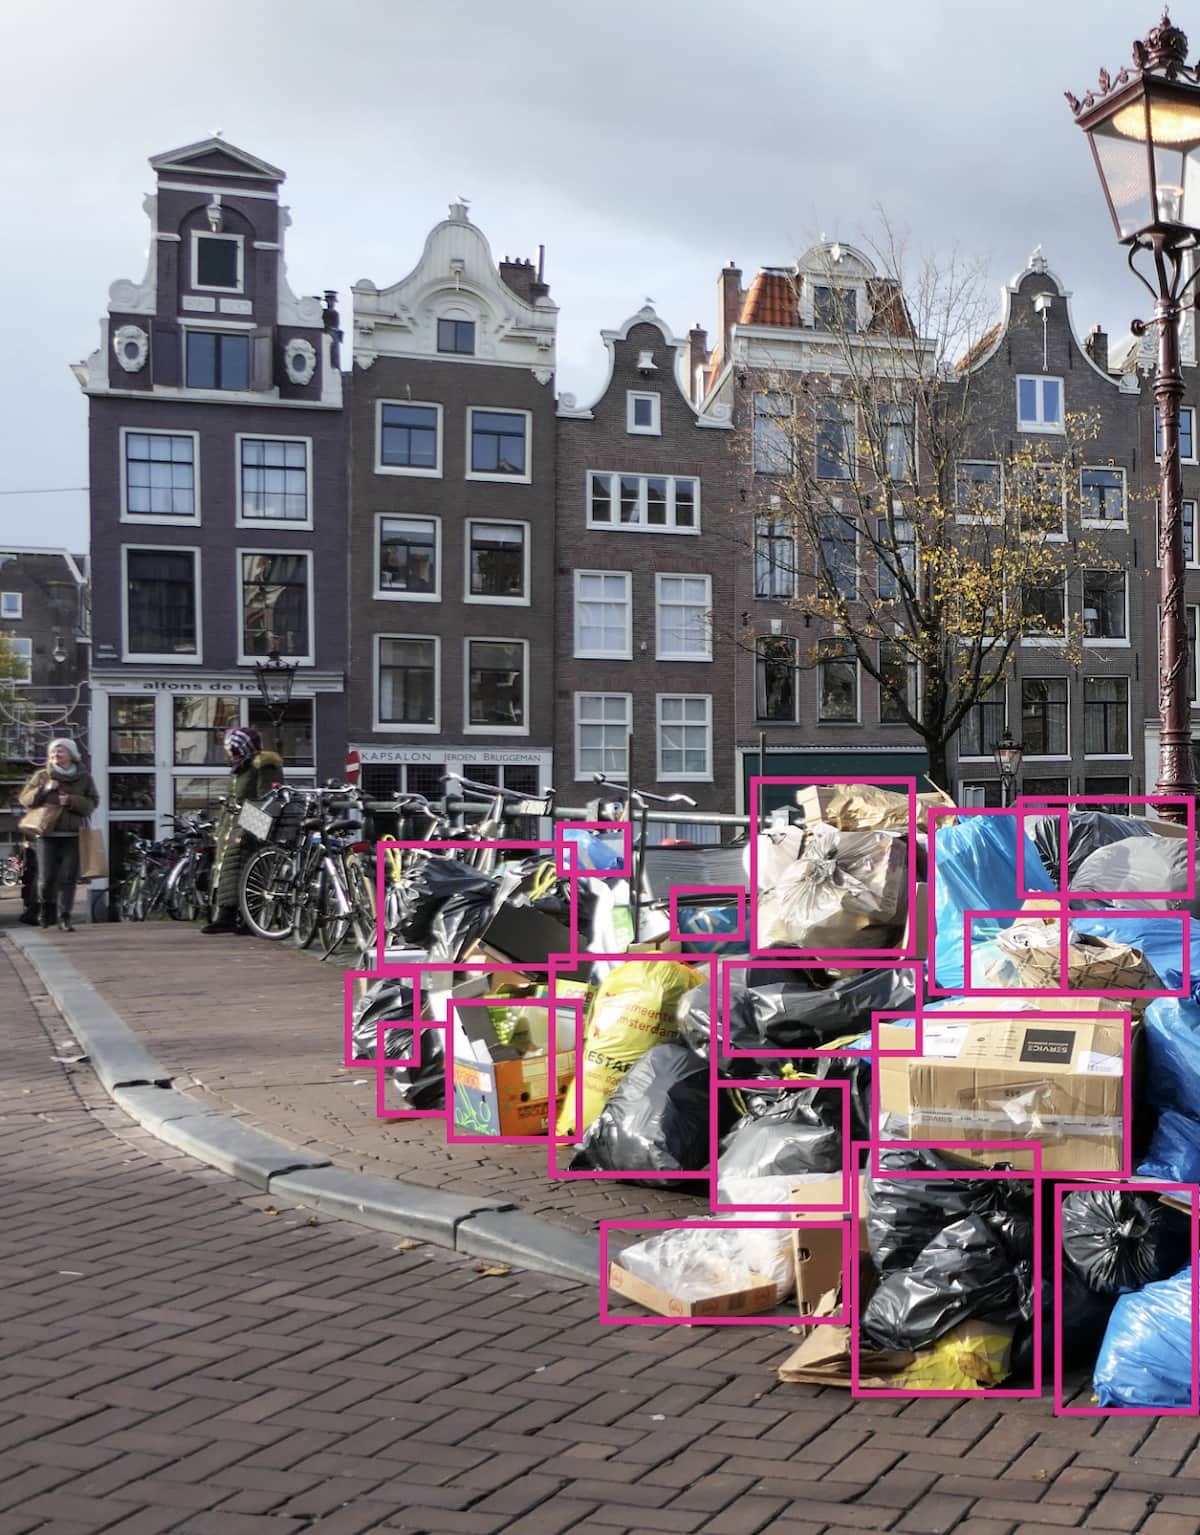 Amsterdam using smart detection cameras to detect waste, allowing for more timely clean up.